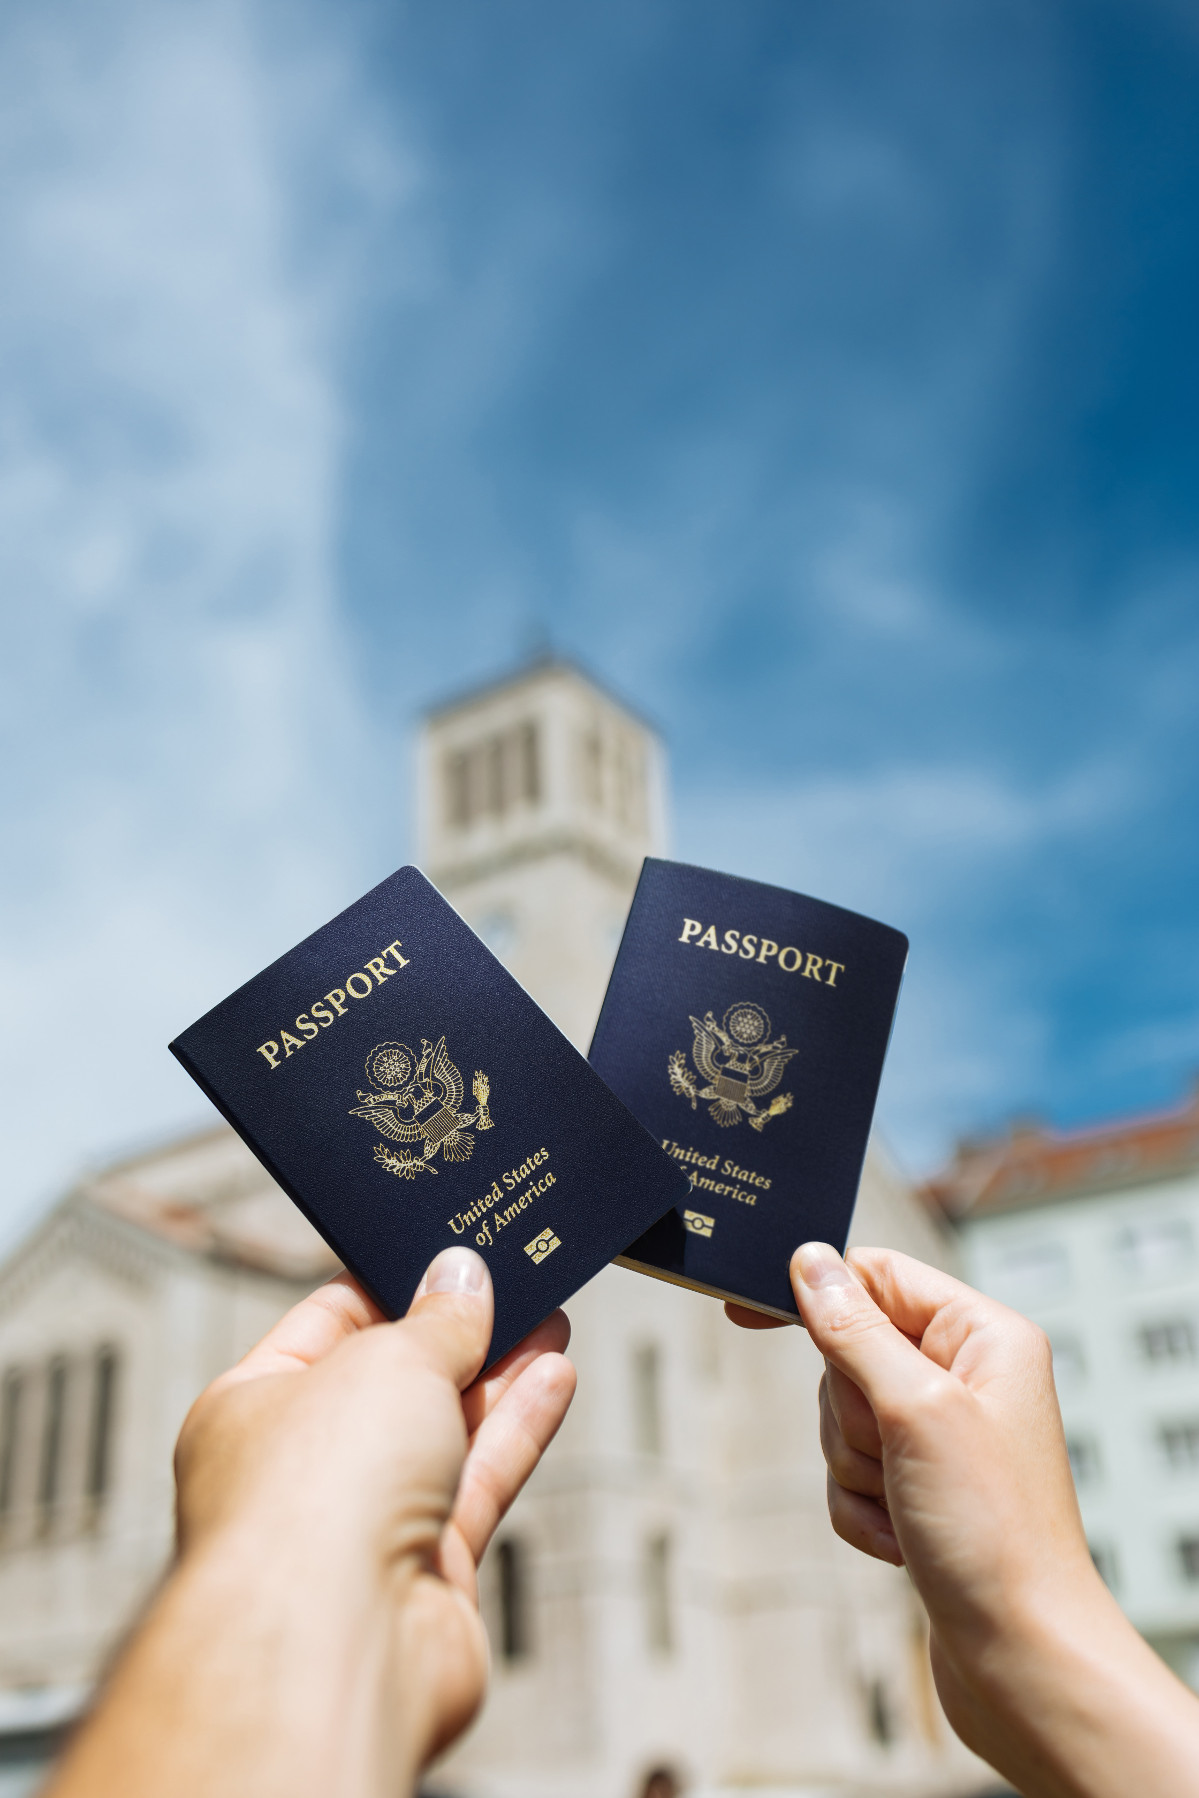 Two people's hands holding US passports against backdrop of historical buildings and blue sky